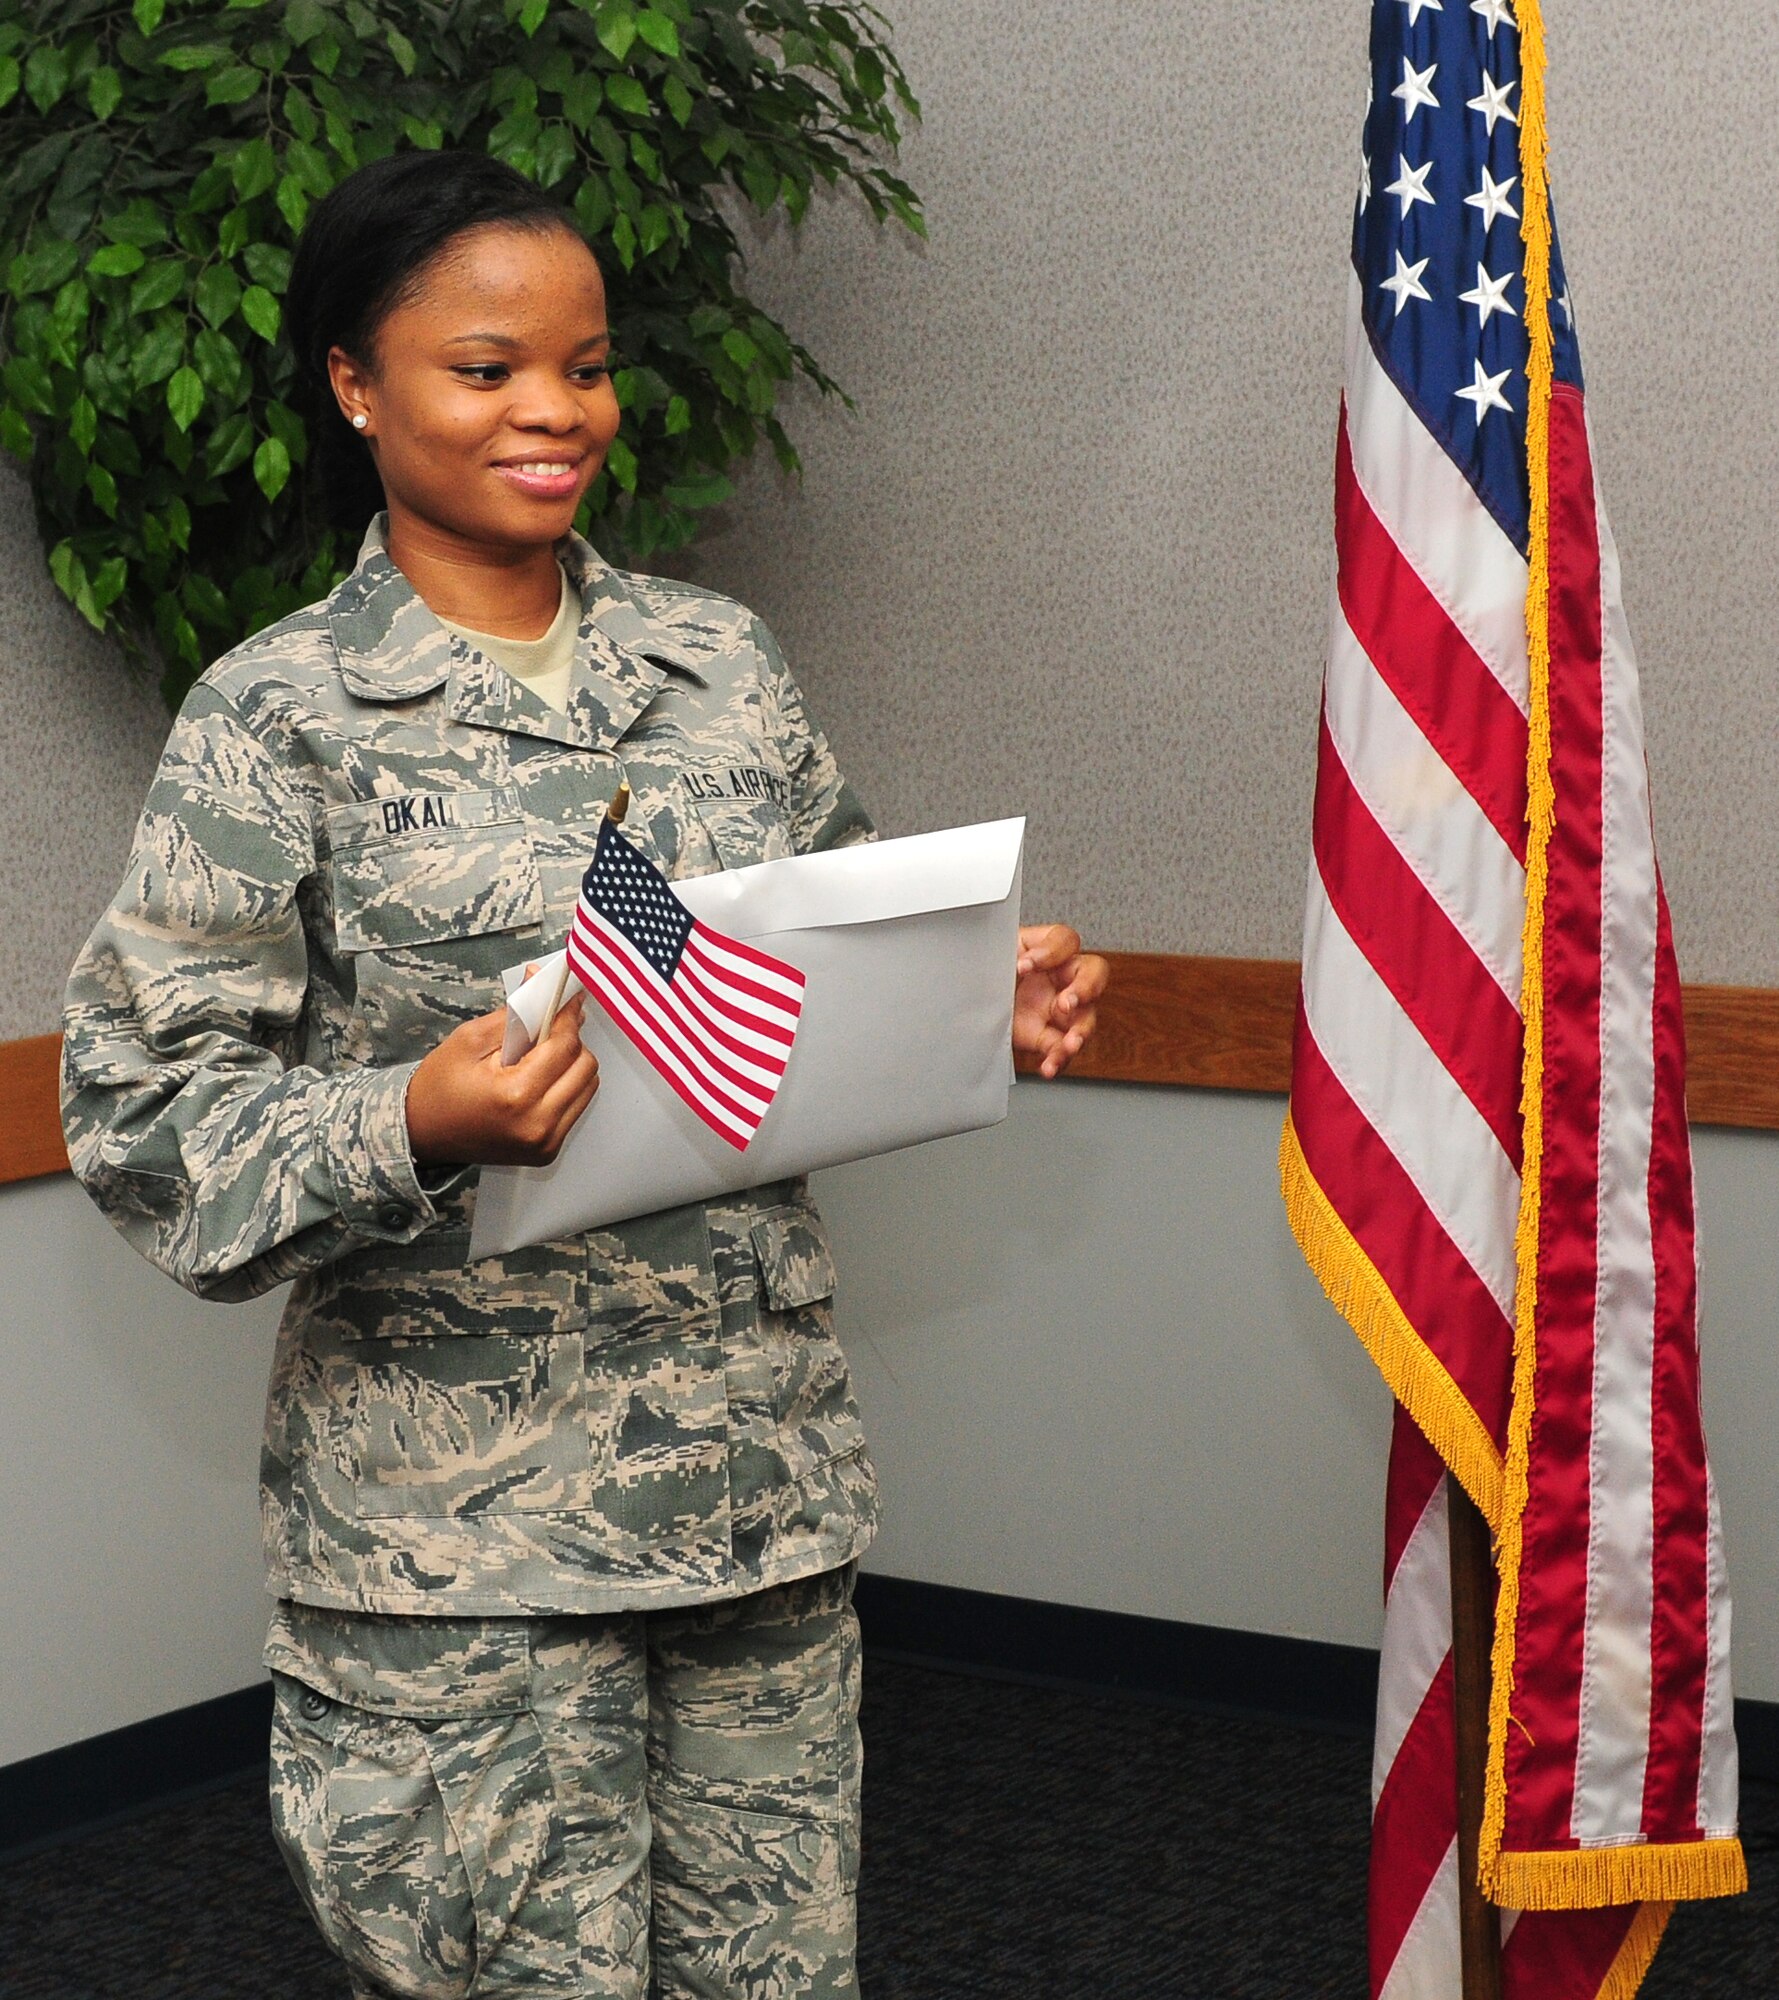 Airman 1st Class Princess Okai, 9th Force Support Squadron, food service apprentice holds an American flag and her citizenship paperwork at the Airman Family Readiness Center at Beale Air Force Base Calif., July 27, 2012. Okai was born in Ghana, West Africa, her and family moved to Long Island, N.Y. in 2007. (U.S. Air Force photo by Senior Airman Allen Pollard/Released)